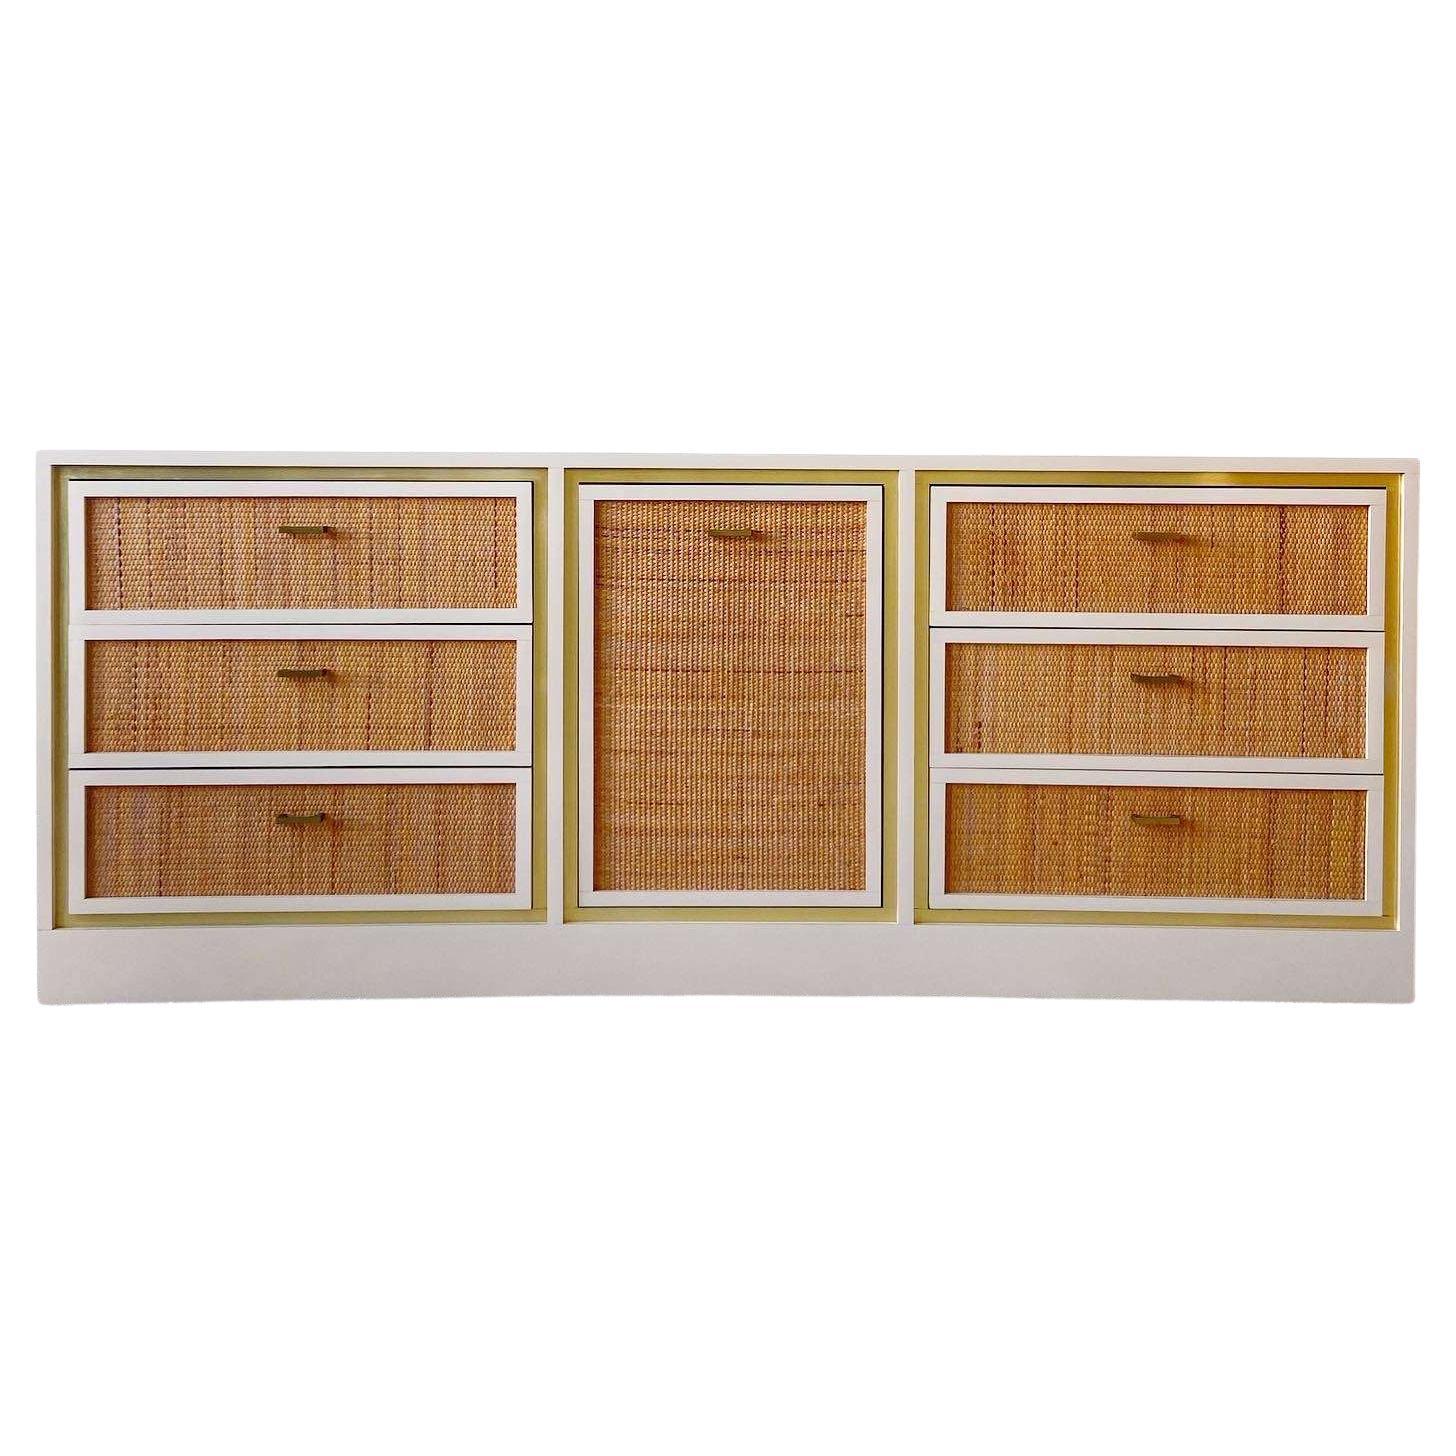 Postmodern Boho Cream Lacquer Laminate and Wicker Dresser - 6 Drawers For Sale